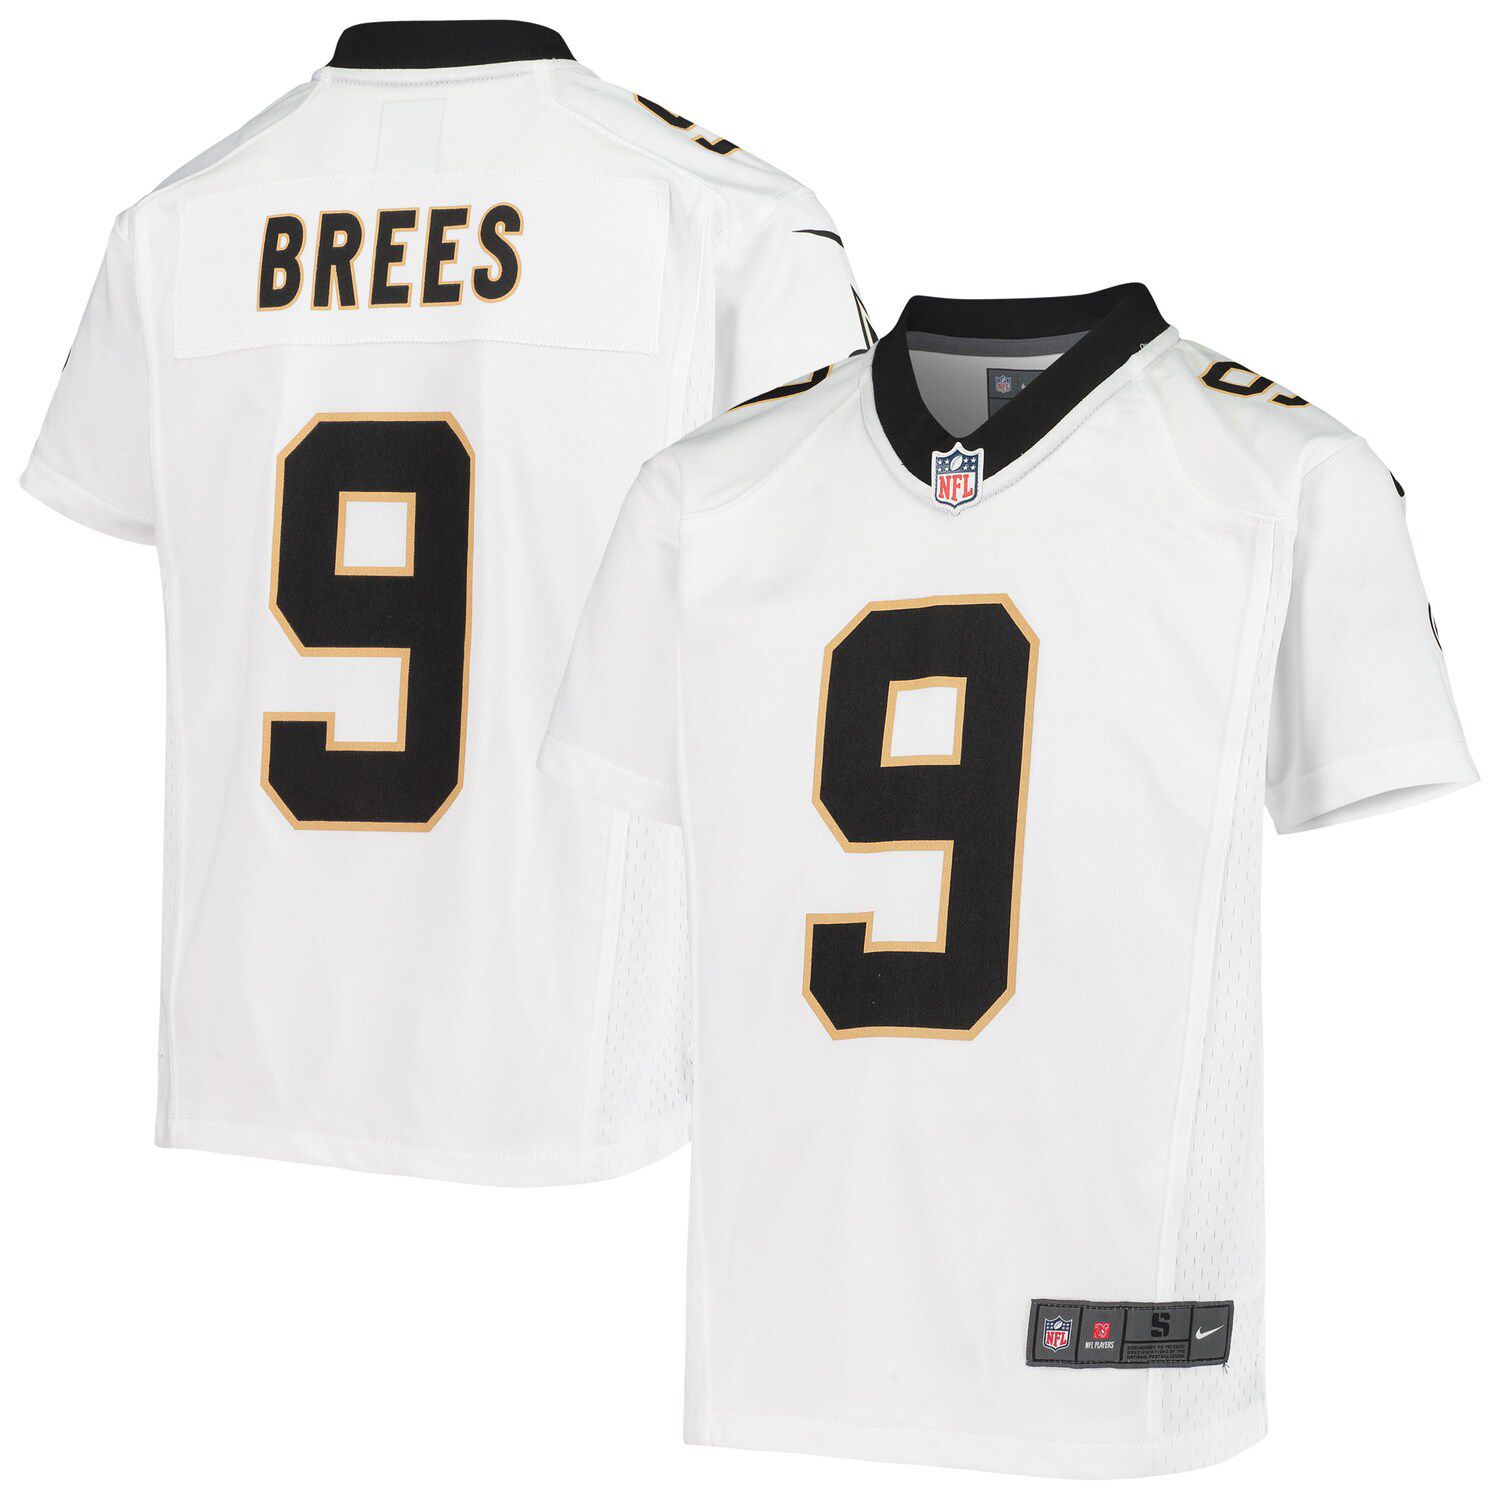 brees jersey white